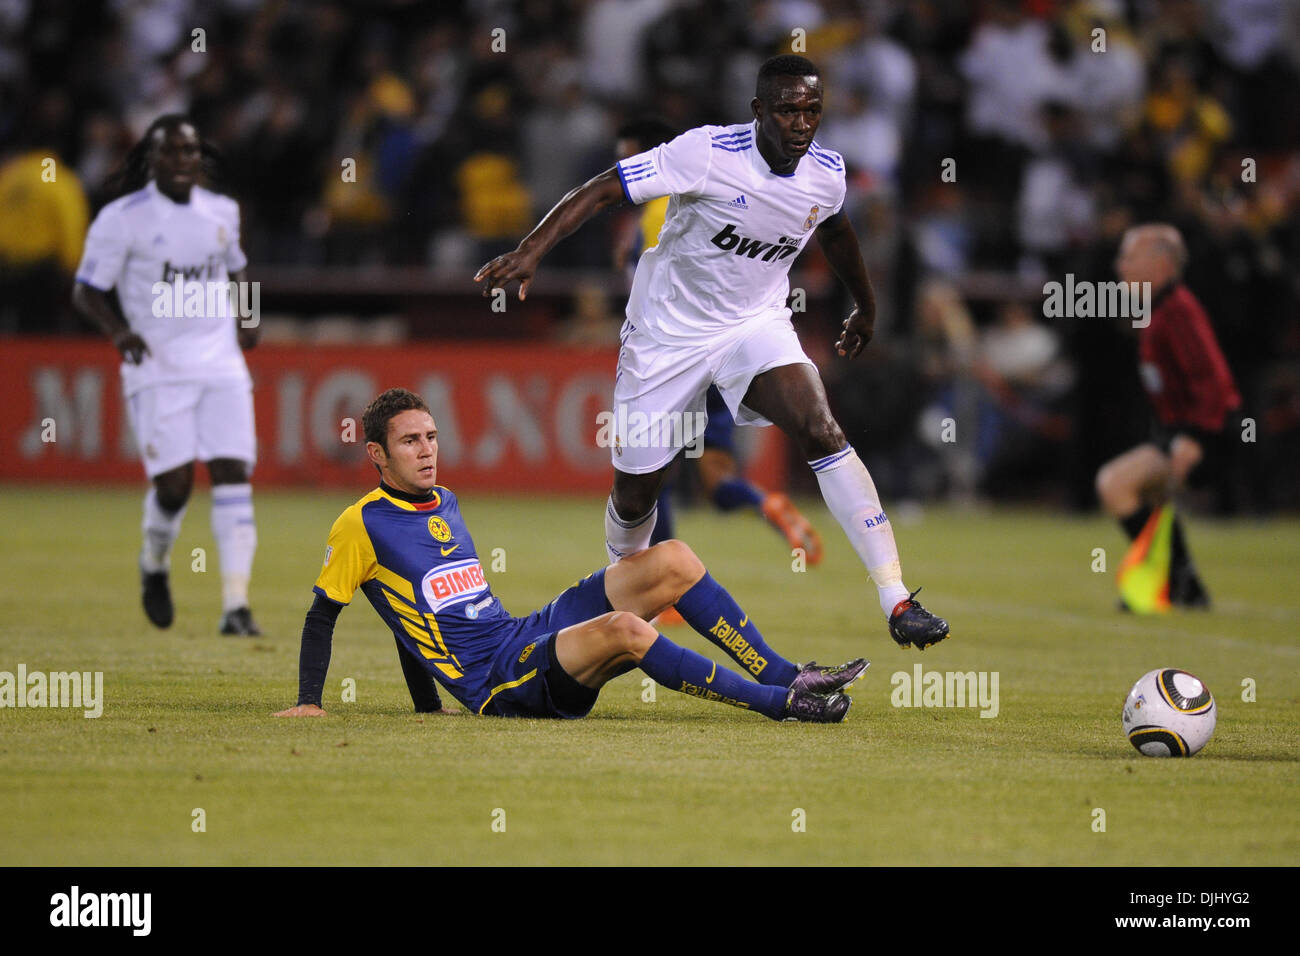 Aug. 04, 2010 - San Francisco, California, U.S - August 4, 2010: Club America M Miguel Layun (19) trips up Real Madrid M Mahamadou Diarra (6) during the friendly between Real Madrid and Club America at Candlestick Park in San Francisco, CA.  Real Madrid took the contest 3-2. (Credit Image: © Matt Cohen/Southcreek Global/ZUMApress.com) Stock Photo